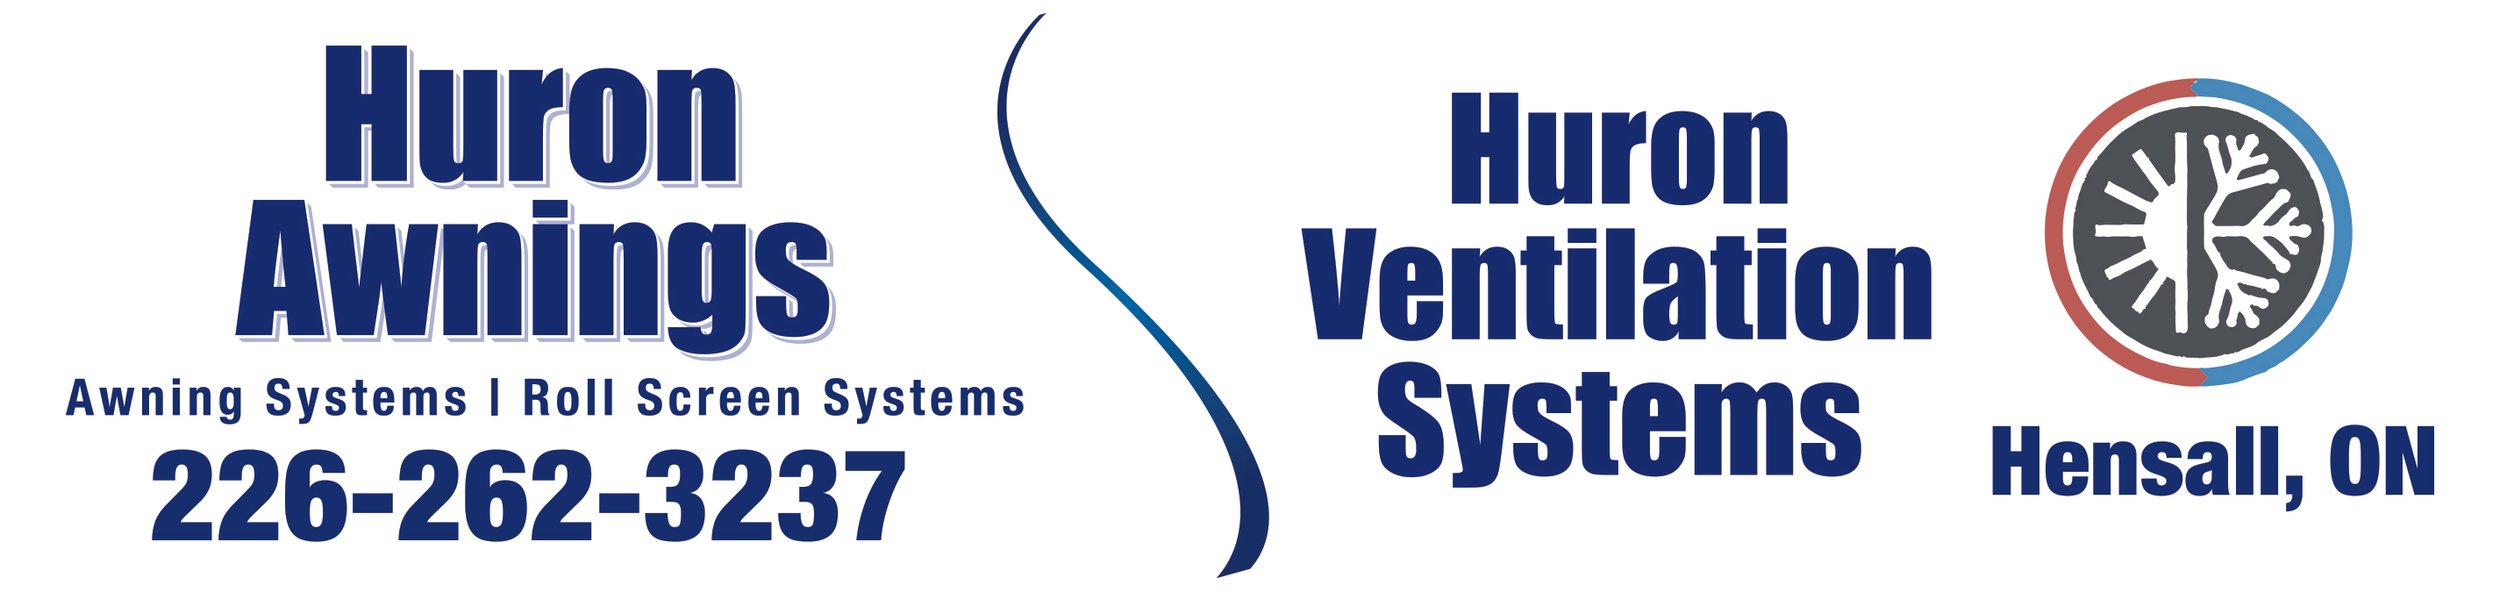 Huron-Awnings-and-Vent-LOGO.jpg